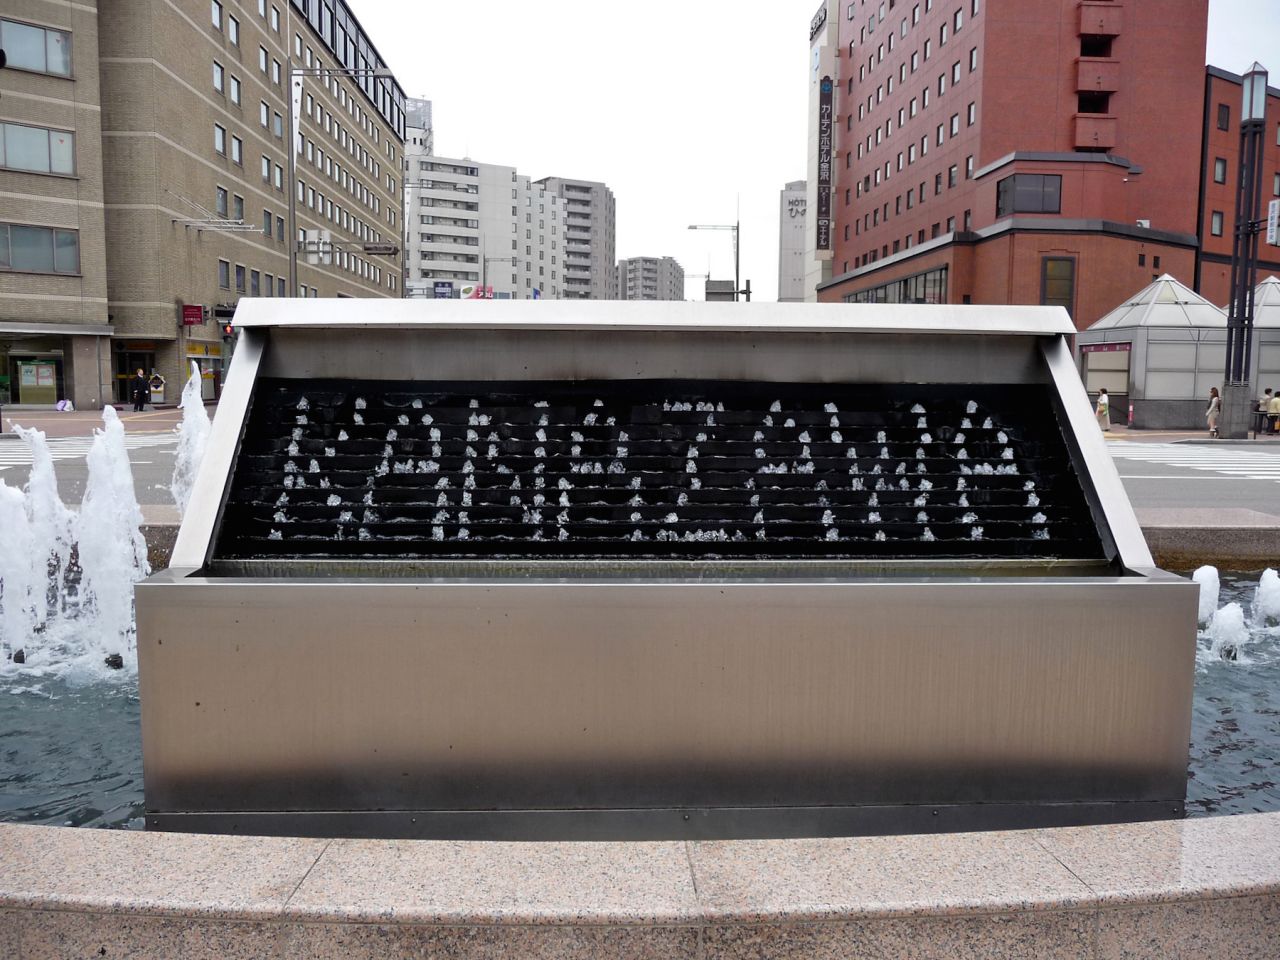 The Kanazawa Fountain Clock is a series of small fountains against a black background. The clock can display numbers and letters in a range of languages.